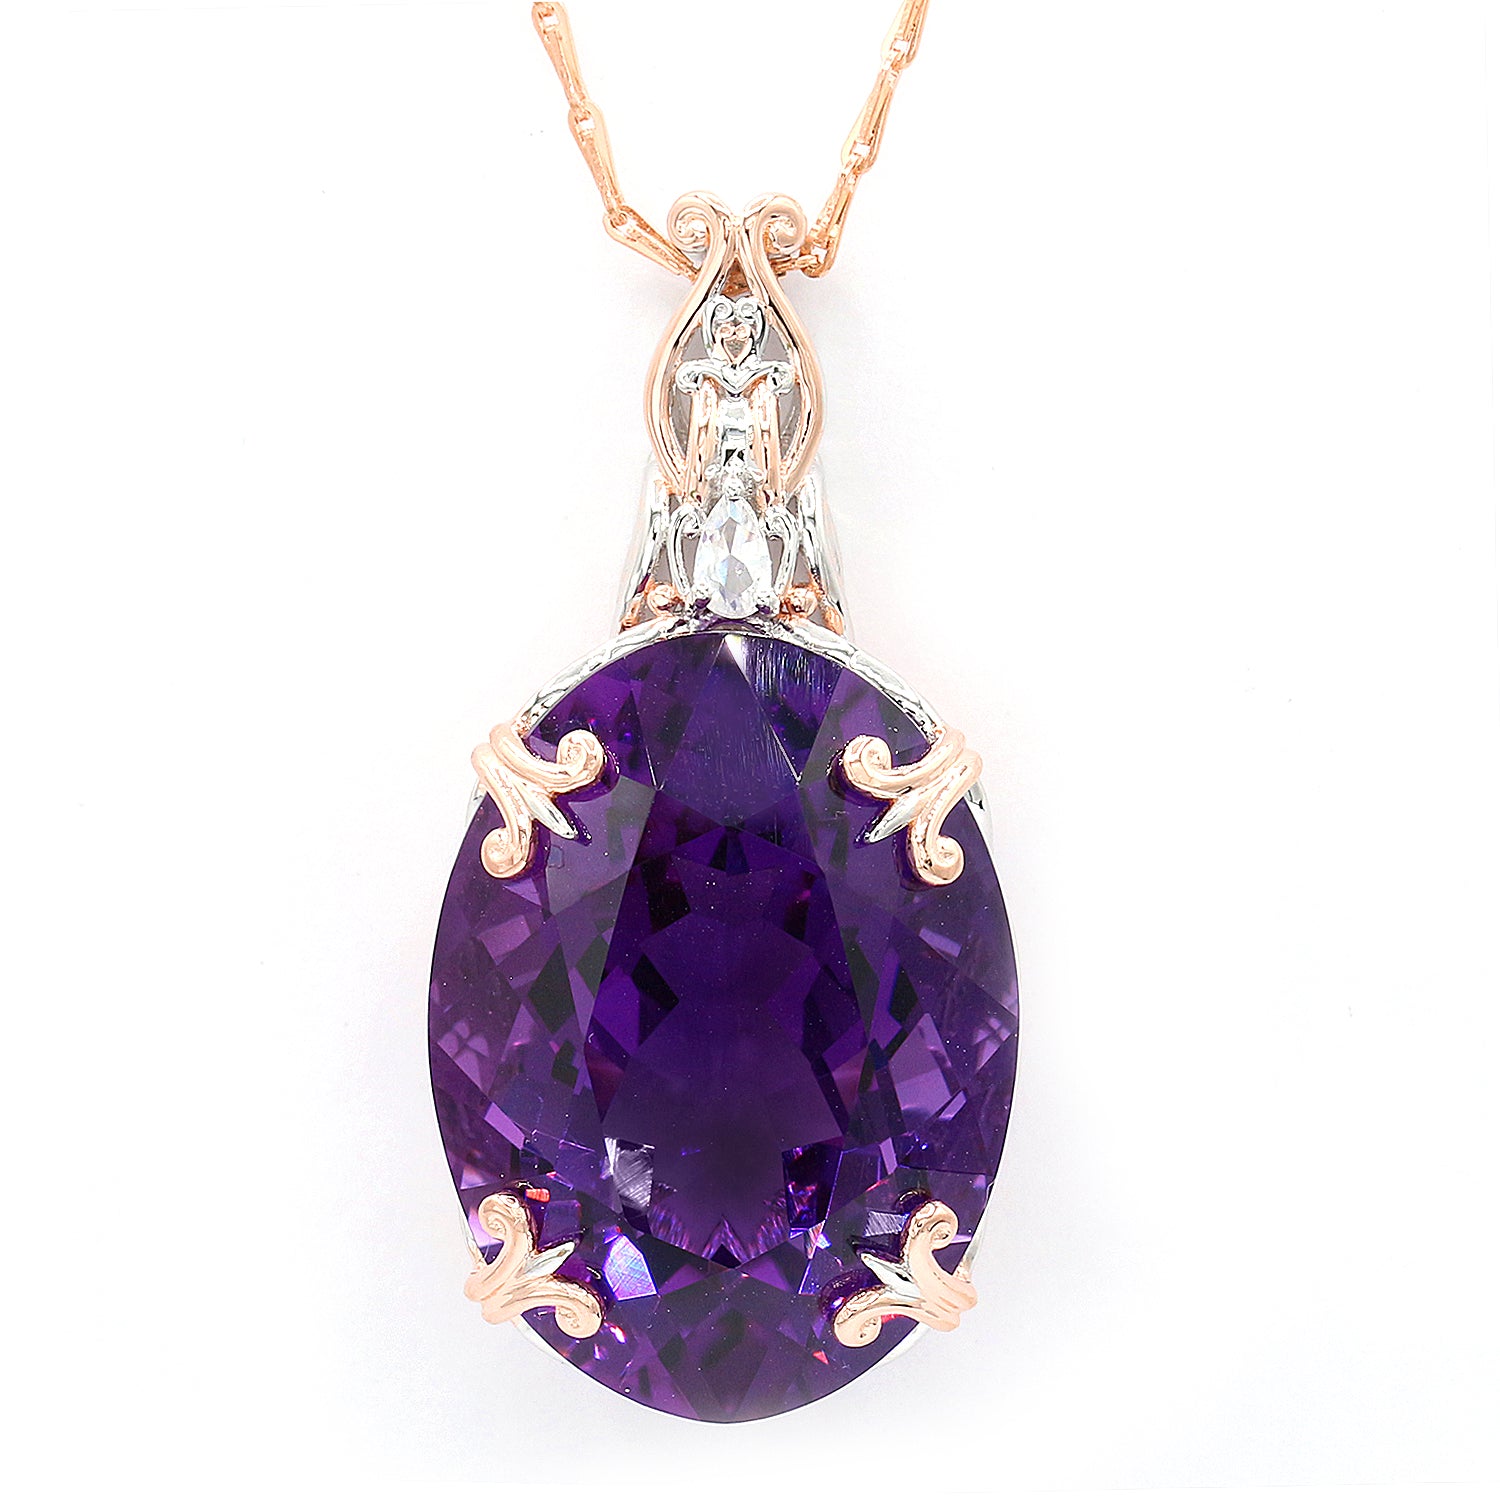 Limited Edition Gems en Vogue One-of-a-kind 62.17ctw Namibian Amethyst & White Zircon Honker Pendant